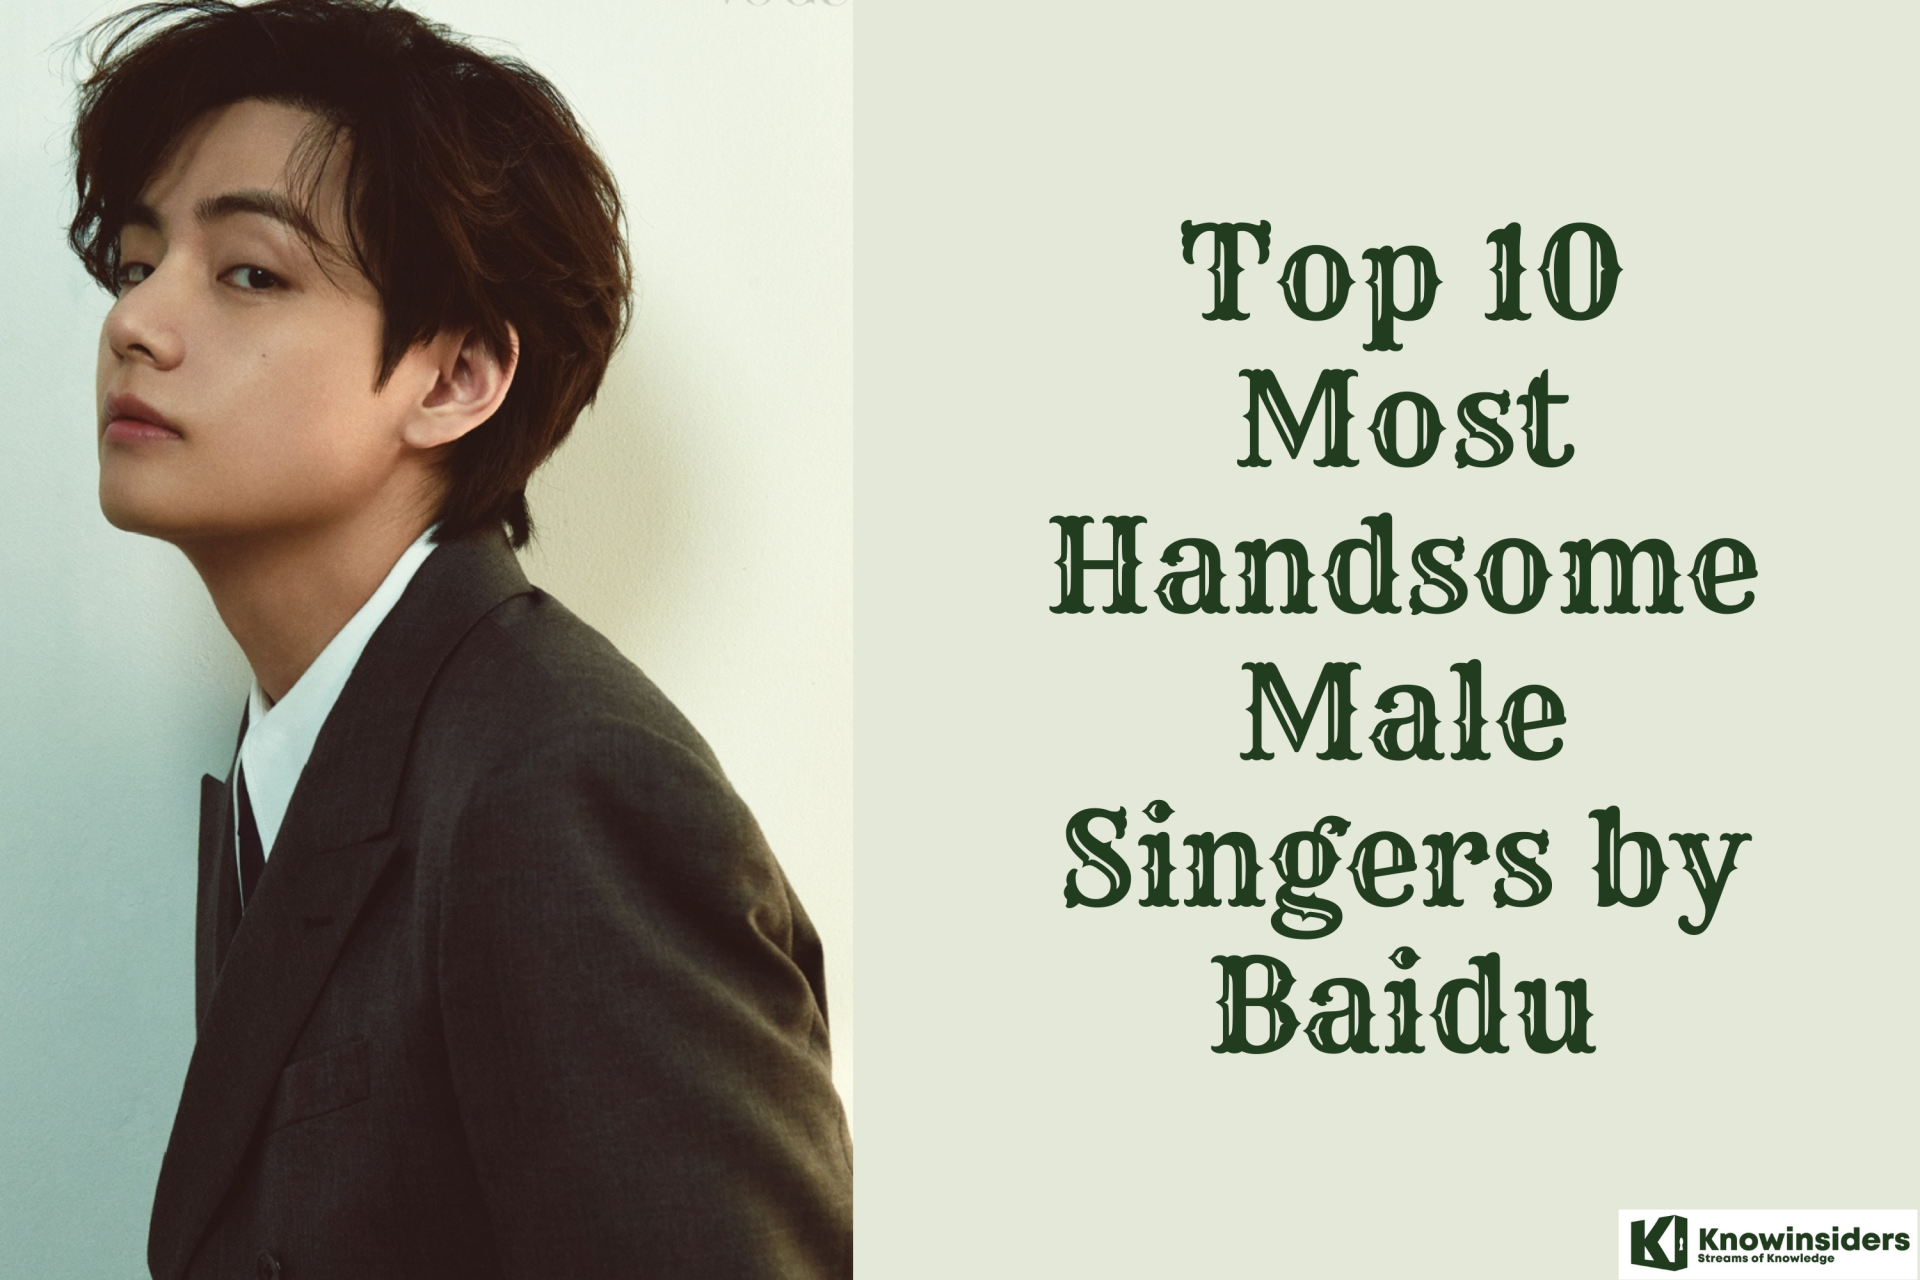 Top 10 Most Handsome Male Singers in the World by Baidu